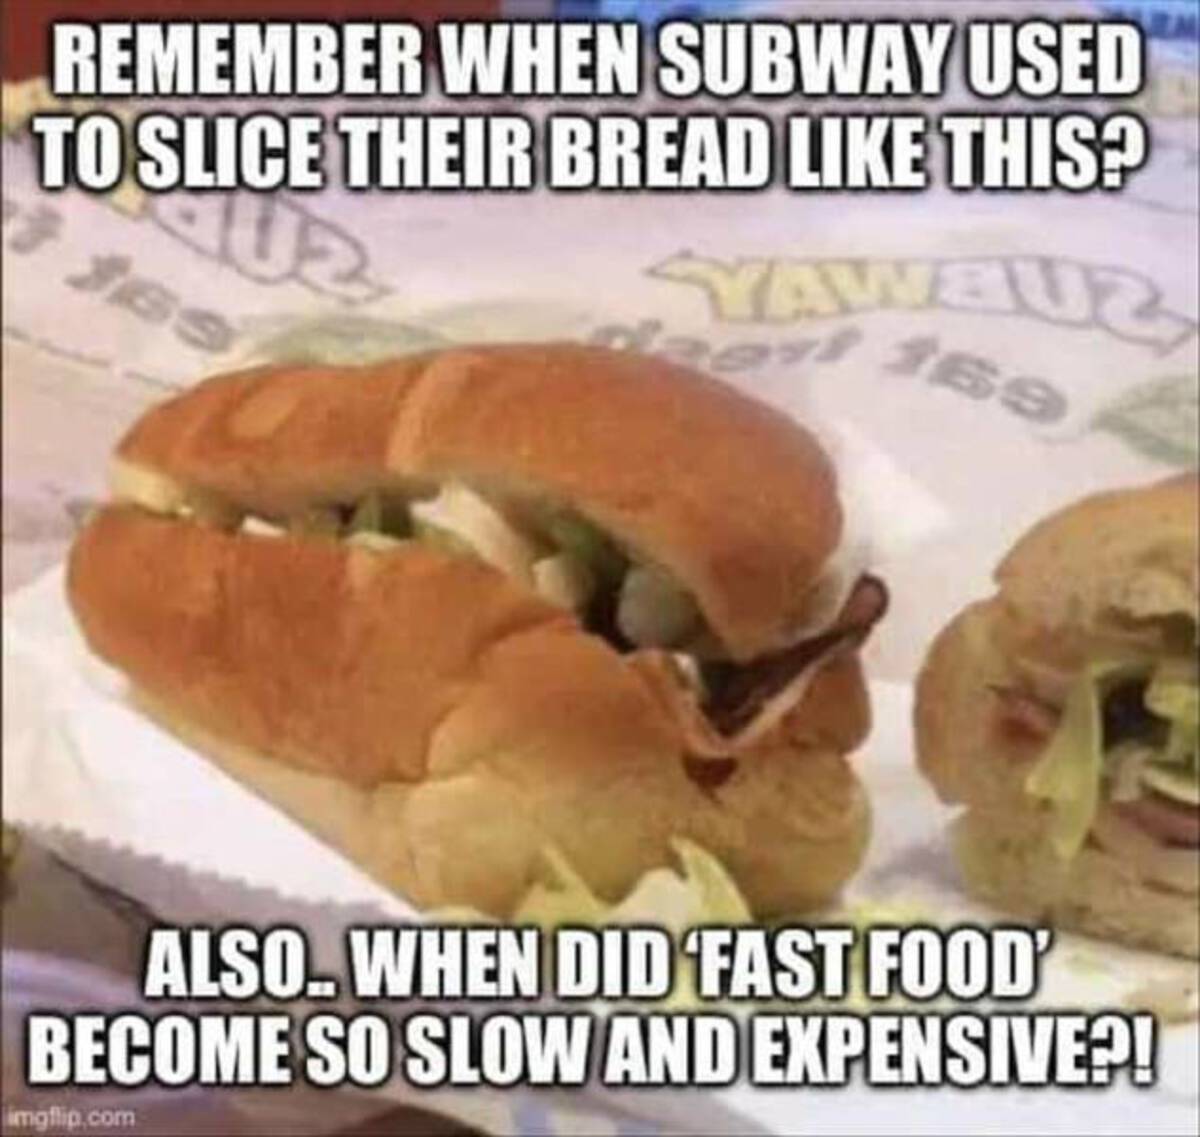 bun - Remember When Subway Used To Slice Their Bread This? Yawbuz dagi 169 Also.. When Did Fast Food Become So Slow And Expensive?! imgflip.com